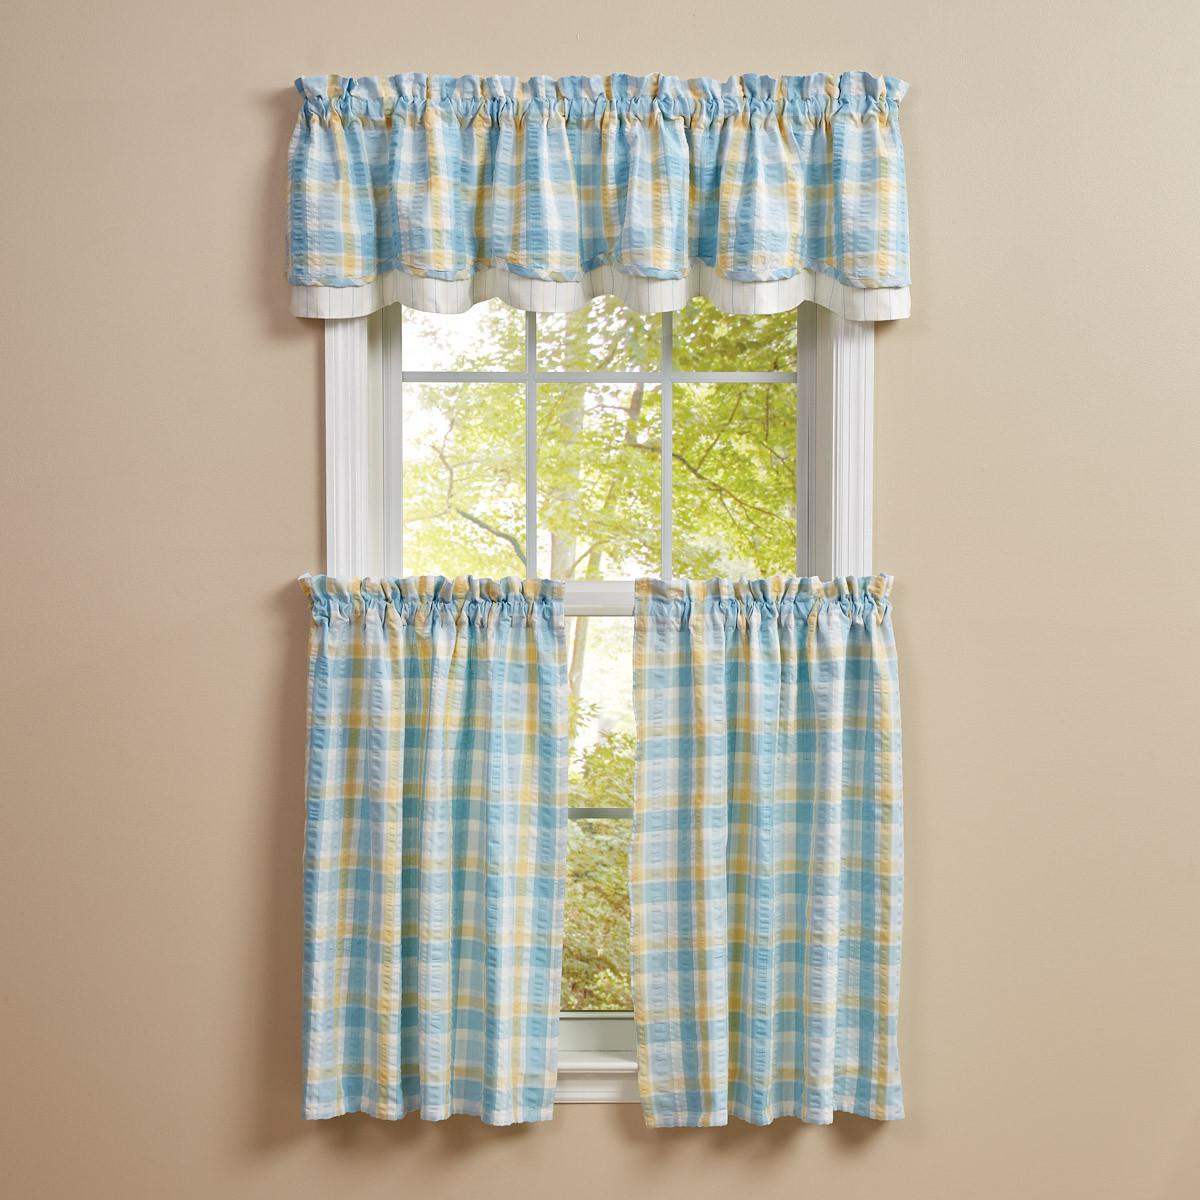 Park Design Forget Me Not Lined Layered Valance